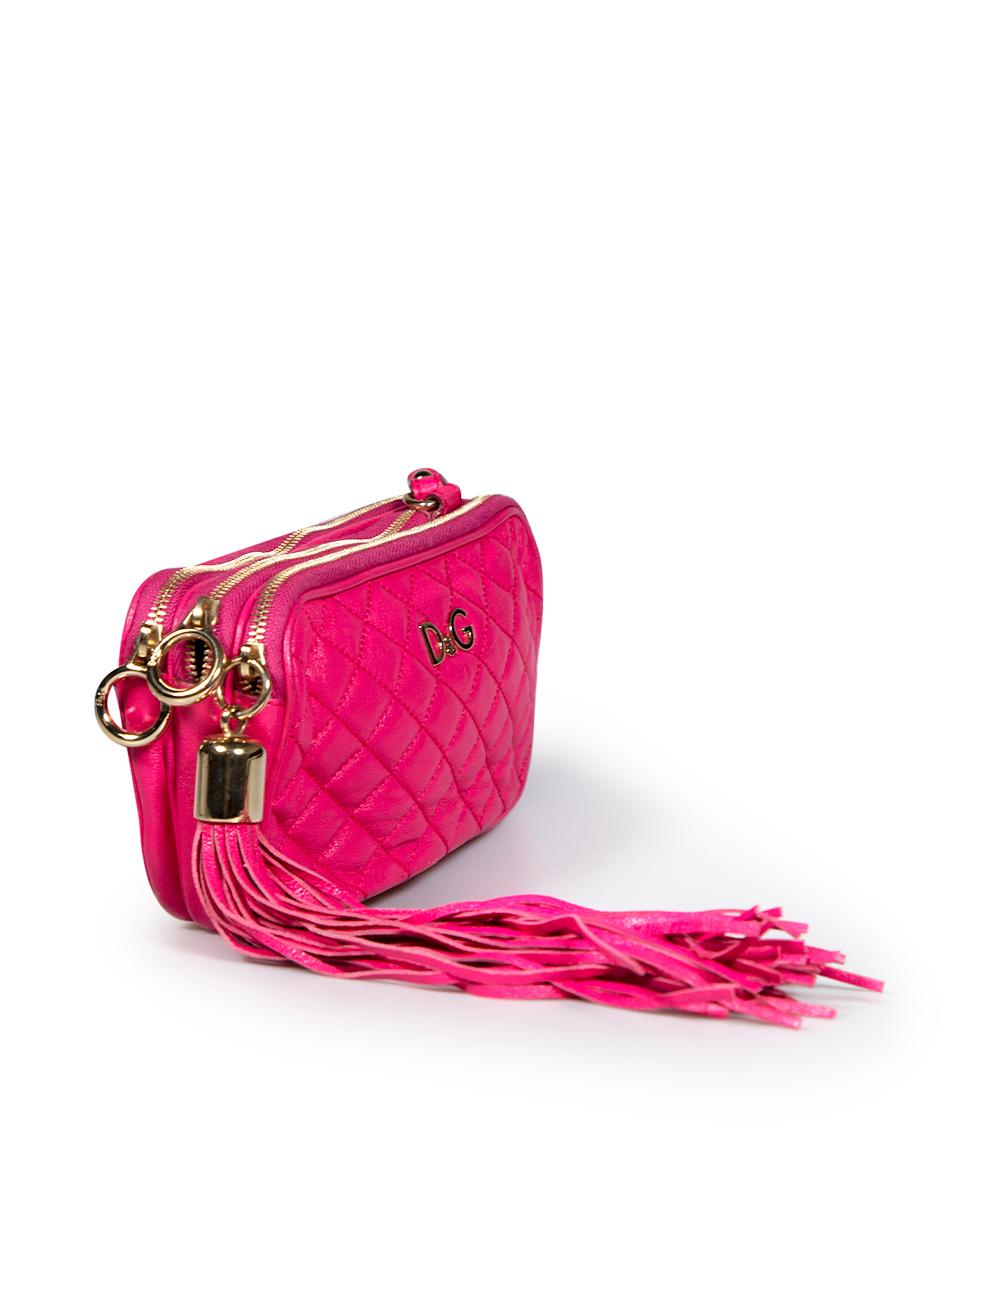 CONDITION is Very good. Minimal wear to clutch is evident. Minimal wear to front and base with small marks to leather on this used Dolce and Gabbana designer resale item.
 
 
 
 Details
 
 
 Lily Glam model
 
 Pink
 
 Leather
 
 Mini clutch
 
